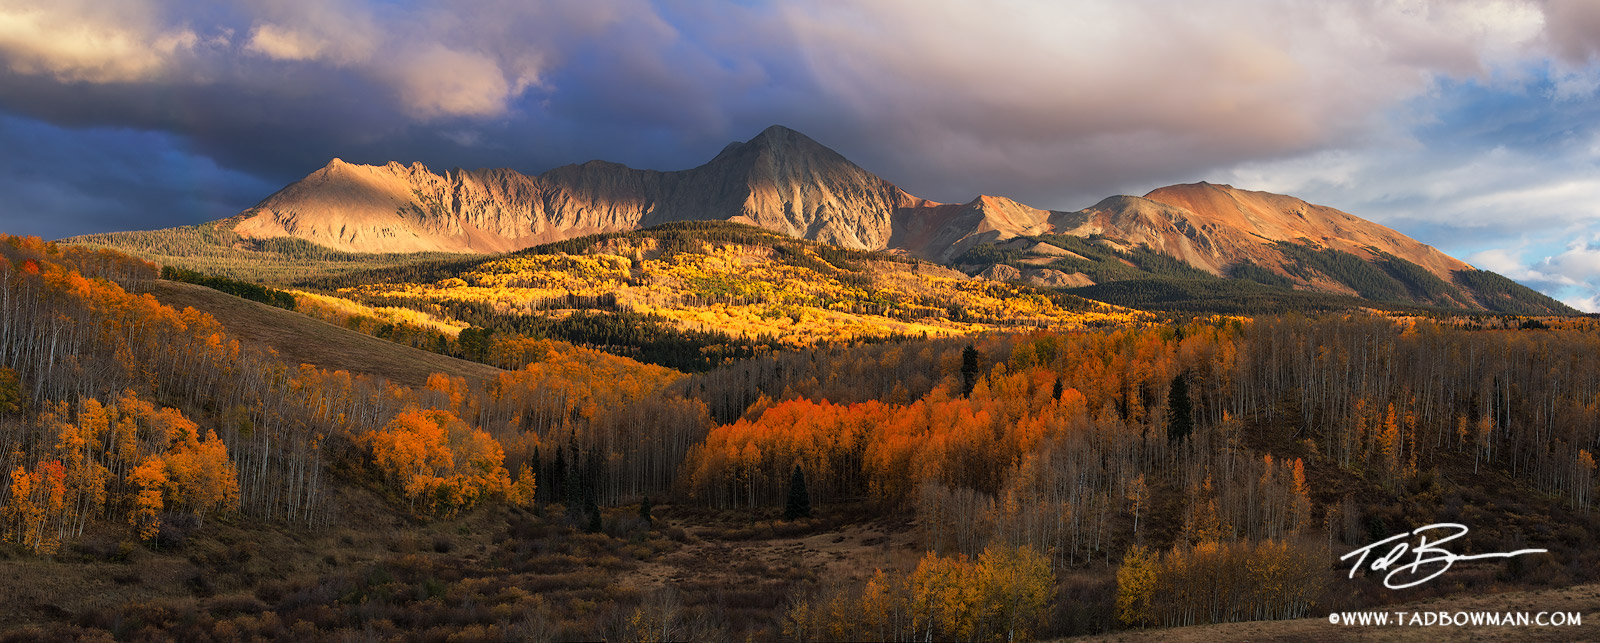 This Colorado panorama photo depicts stormy conditions over the San Juan Mountains with colorful fall foliage in the foreground...